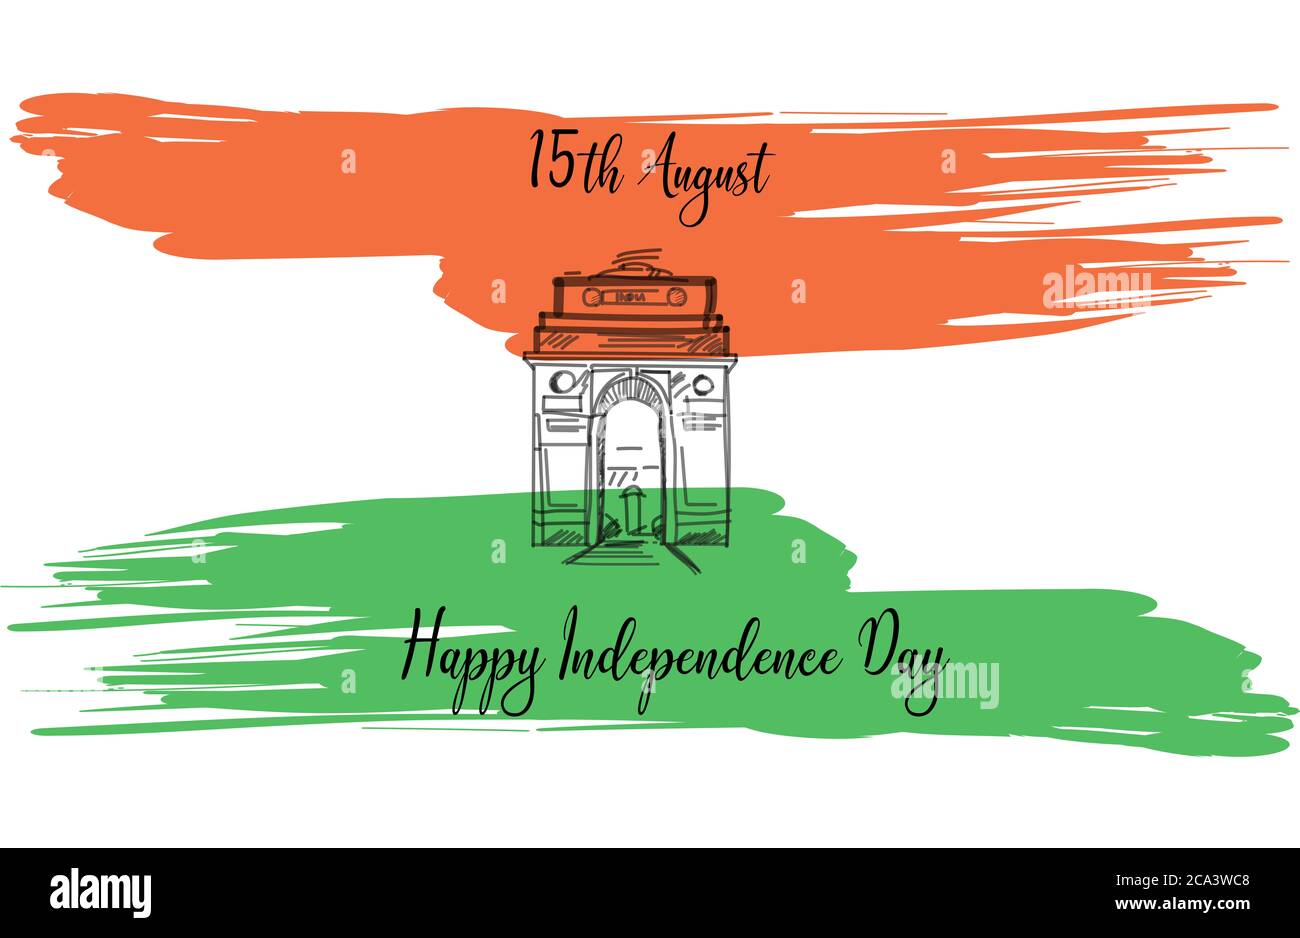 1822 India Independence Day Drawings Images Stock Photos  Vectors   Shutterstock